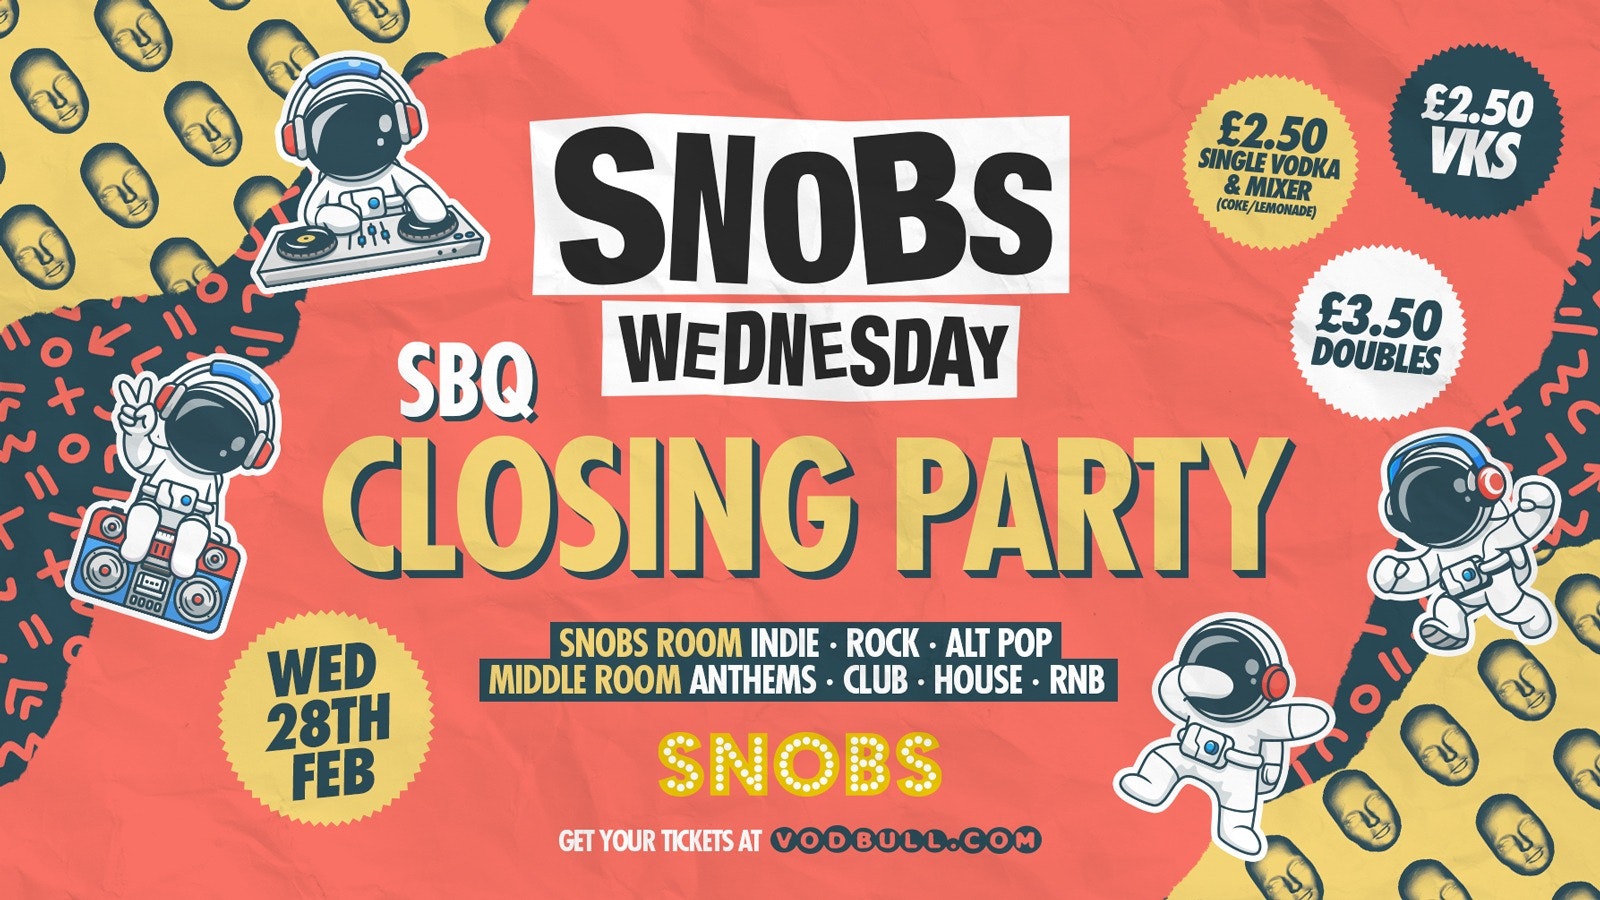 🎶 SNOBS WEDNESDAY!! 🎶 🔥[TONIGHT!!] 🔥🚨THE WEDS CLOSING PARTY🚨 28/02